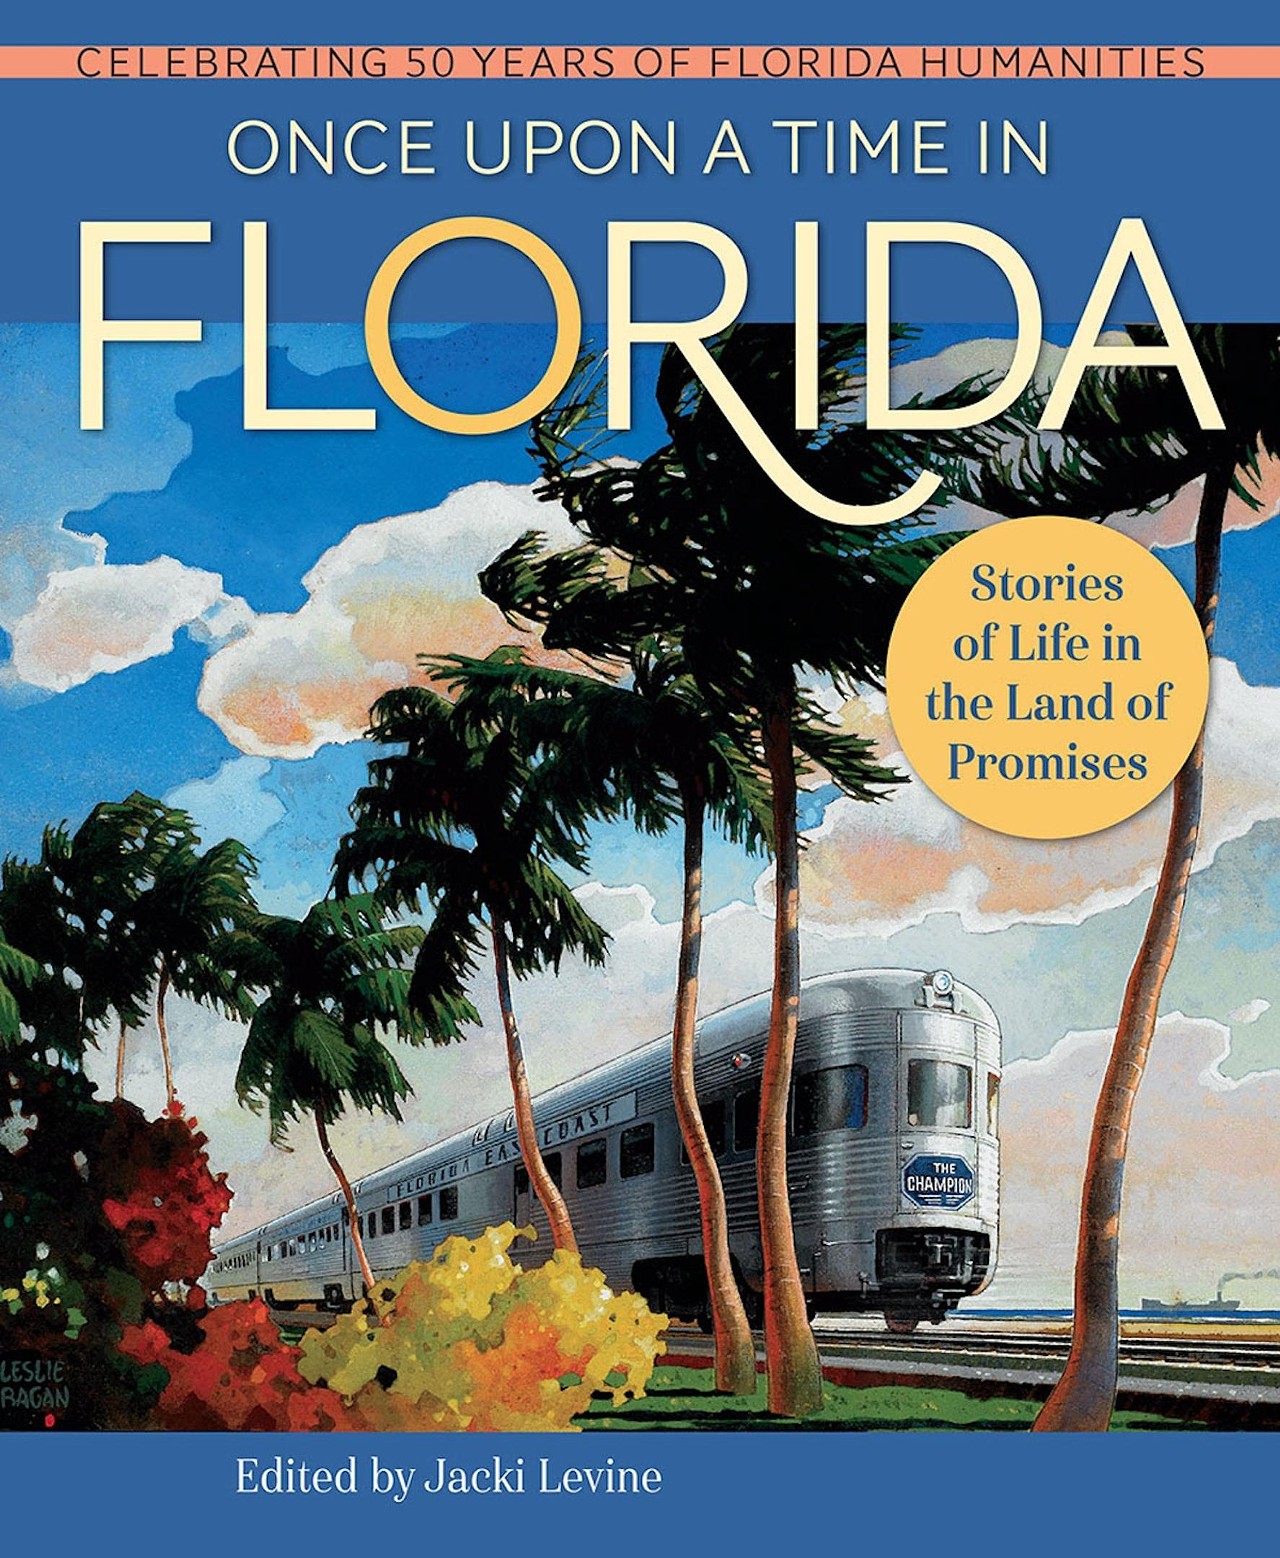 ‘Once Upon a Time in Florida: Stories of Life in the Land of Promises’ Edited by Jacki Levine
This anthology features 50 stories drawn from the archives of Florida Humanities’ Forum magazine (stylized “FORUM”). Authors include scholars, journalists and other literary movers and shakers, including Gary R. Mormino, Eric Deggans, Dalia Colon, Lauren Groff, Craig Pittman, Edna Buchanan, J. Michael Francis and more. As a celebration of Florida Humanities' 50th year, the collection includes myth busters, deep dives into the state’s history and lore and narrative journalistic pieces about the space race and Walt Disney World in Florida. The hardcover tome is also as pretty as it is informative, with artwork and 150 photos—including this one below showing early Miami real estate developer Carl Fisher in 1927 marketing his Miami Beach golf course, using Rosie the Elephant as a caddy. (Florida Humanities)Photo via Florida Humanities